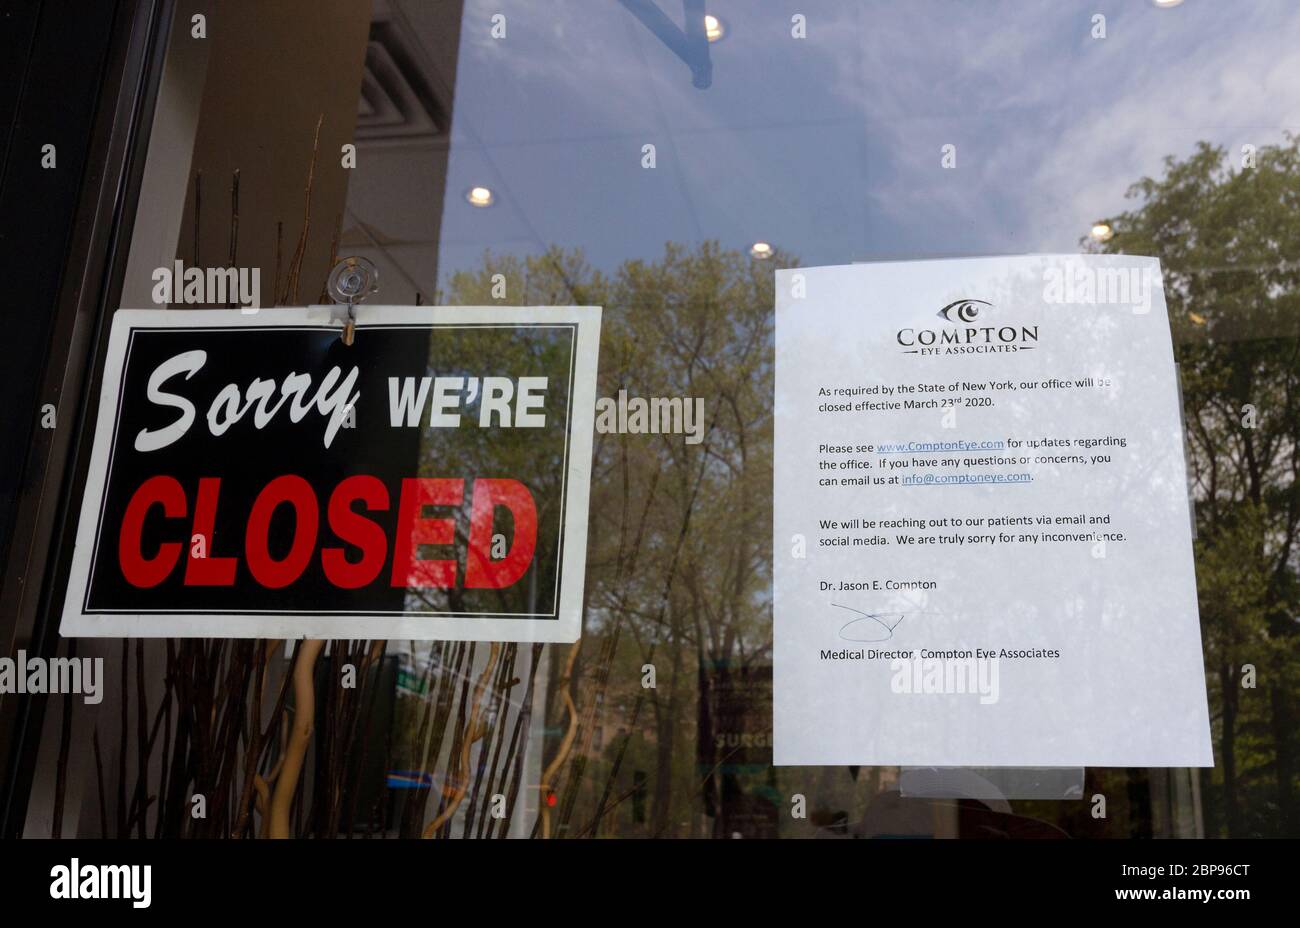 sorry we're closed sign in the window of Compton Eye Associates, an optometrist in upper Manhattan, due to the coronavirus or covid-19 pandemic Stock Photo